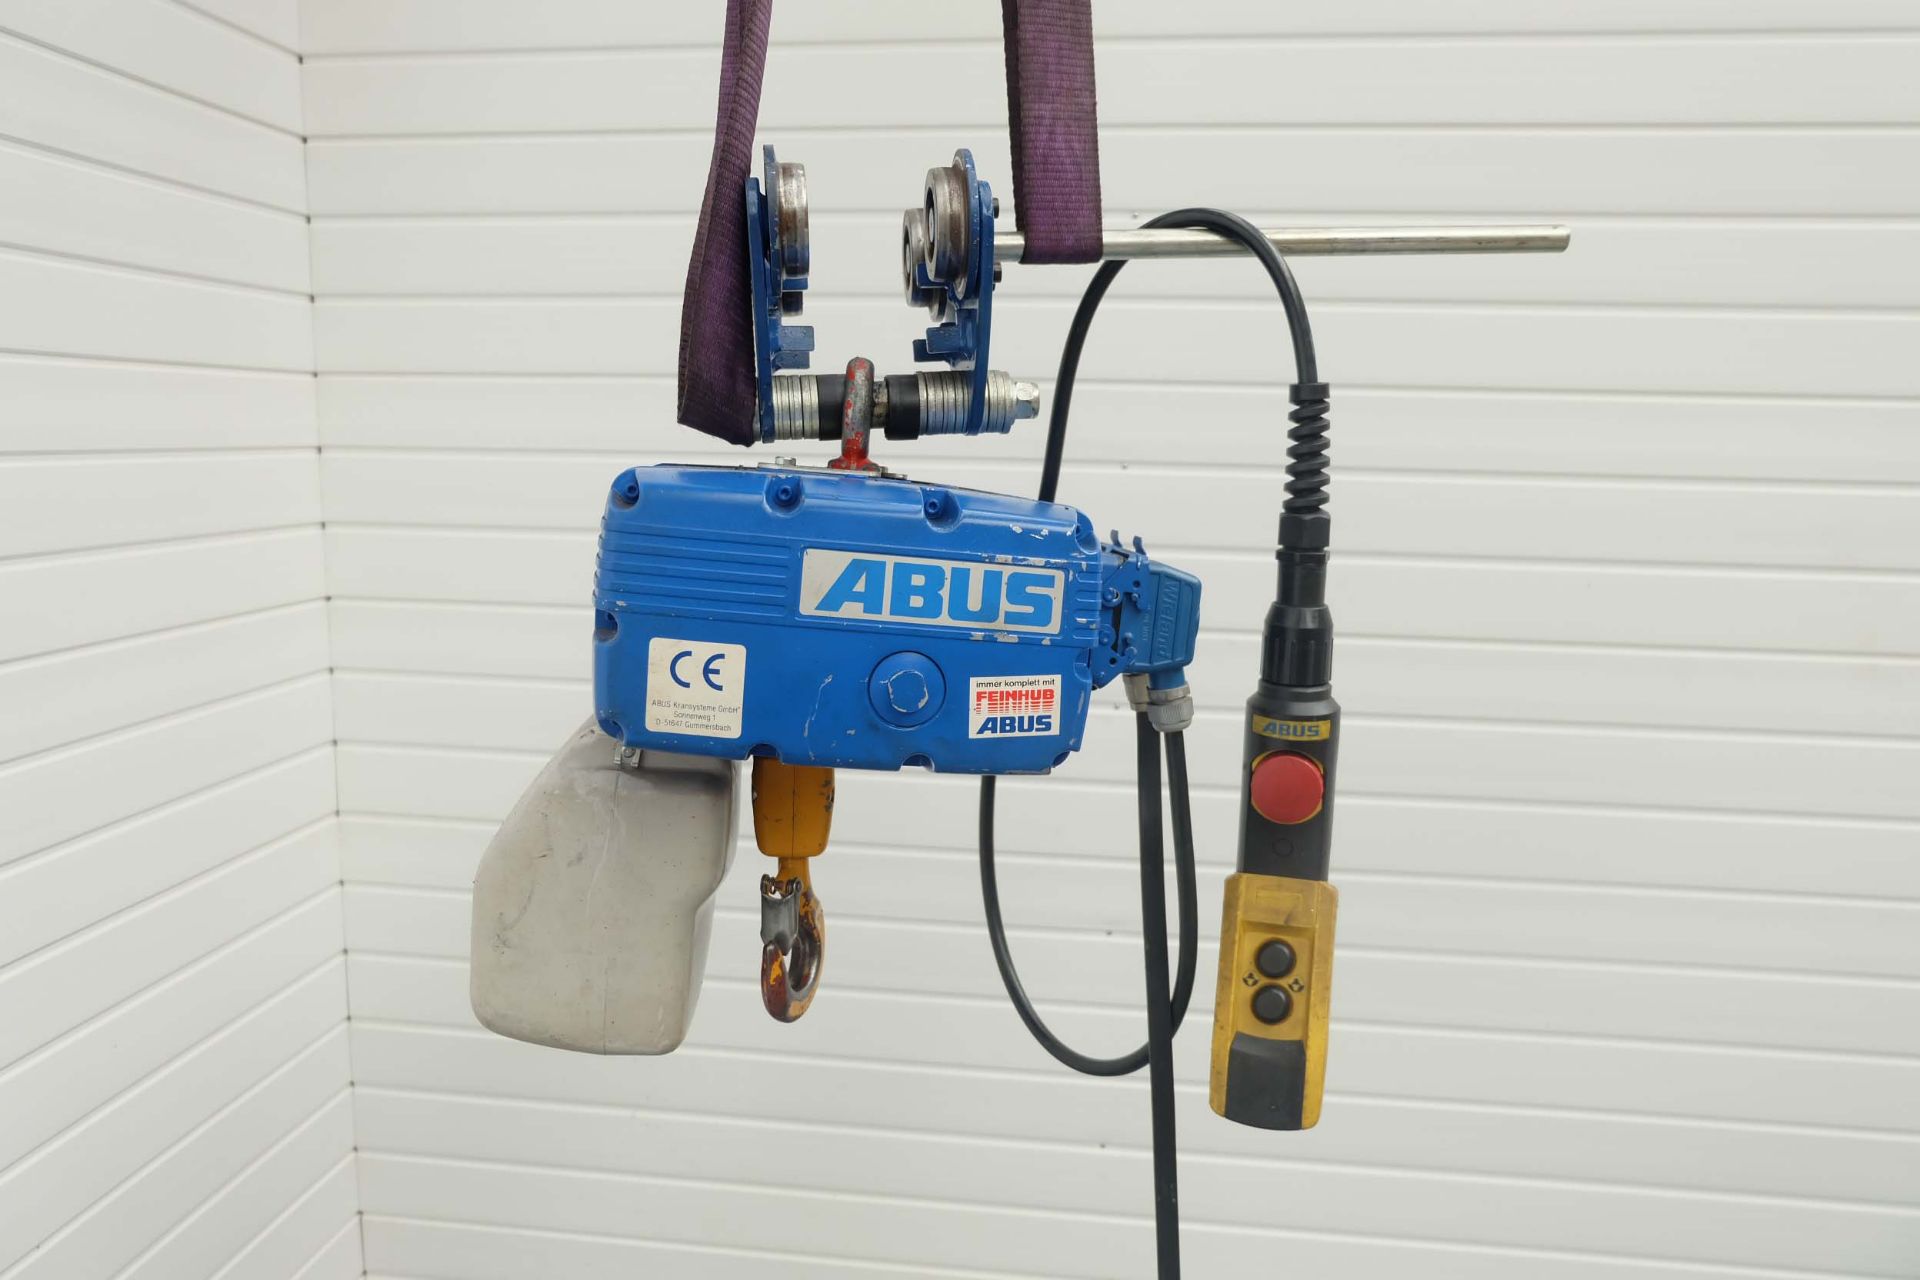 ABUS Type GM3 Electric Chain Hoist. 2 Speed With Pendant Control. Capacity 500 Kg. Year 1997.